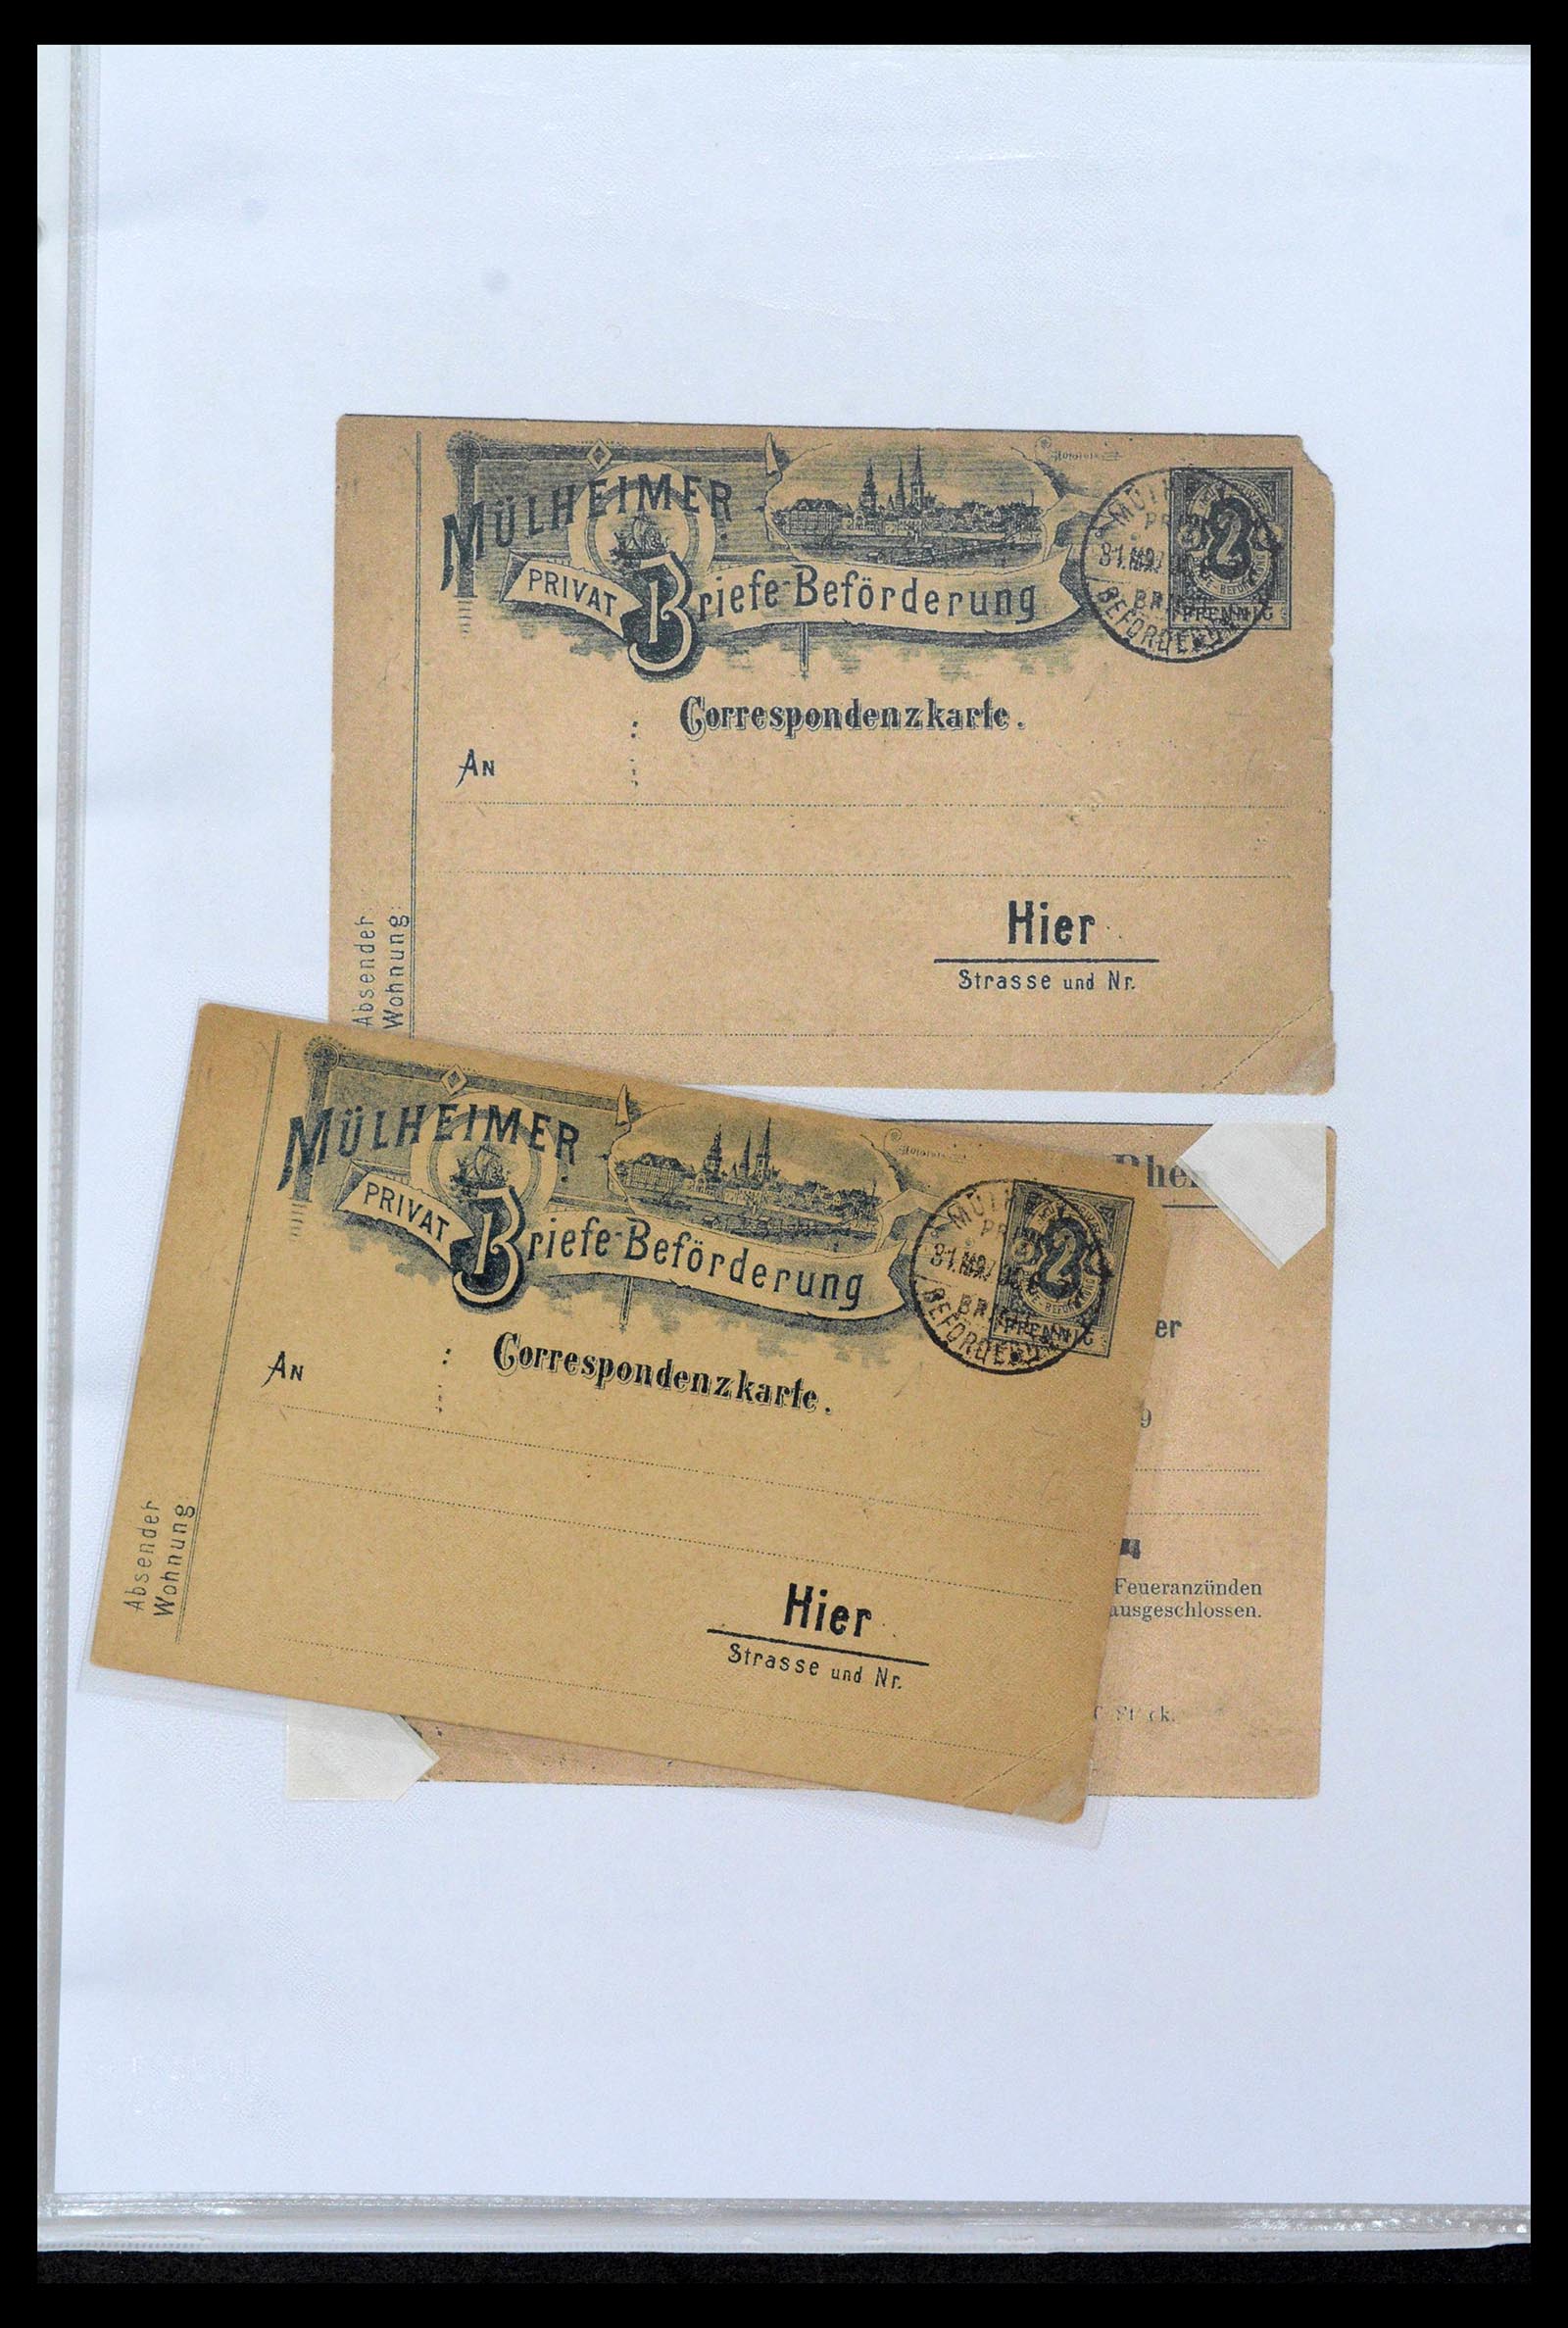 39369 0019 - Stamp collection 39369 Germany citypost 1886-1899.